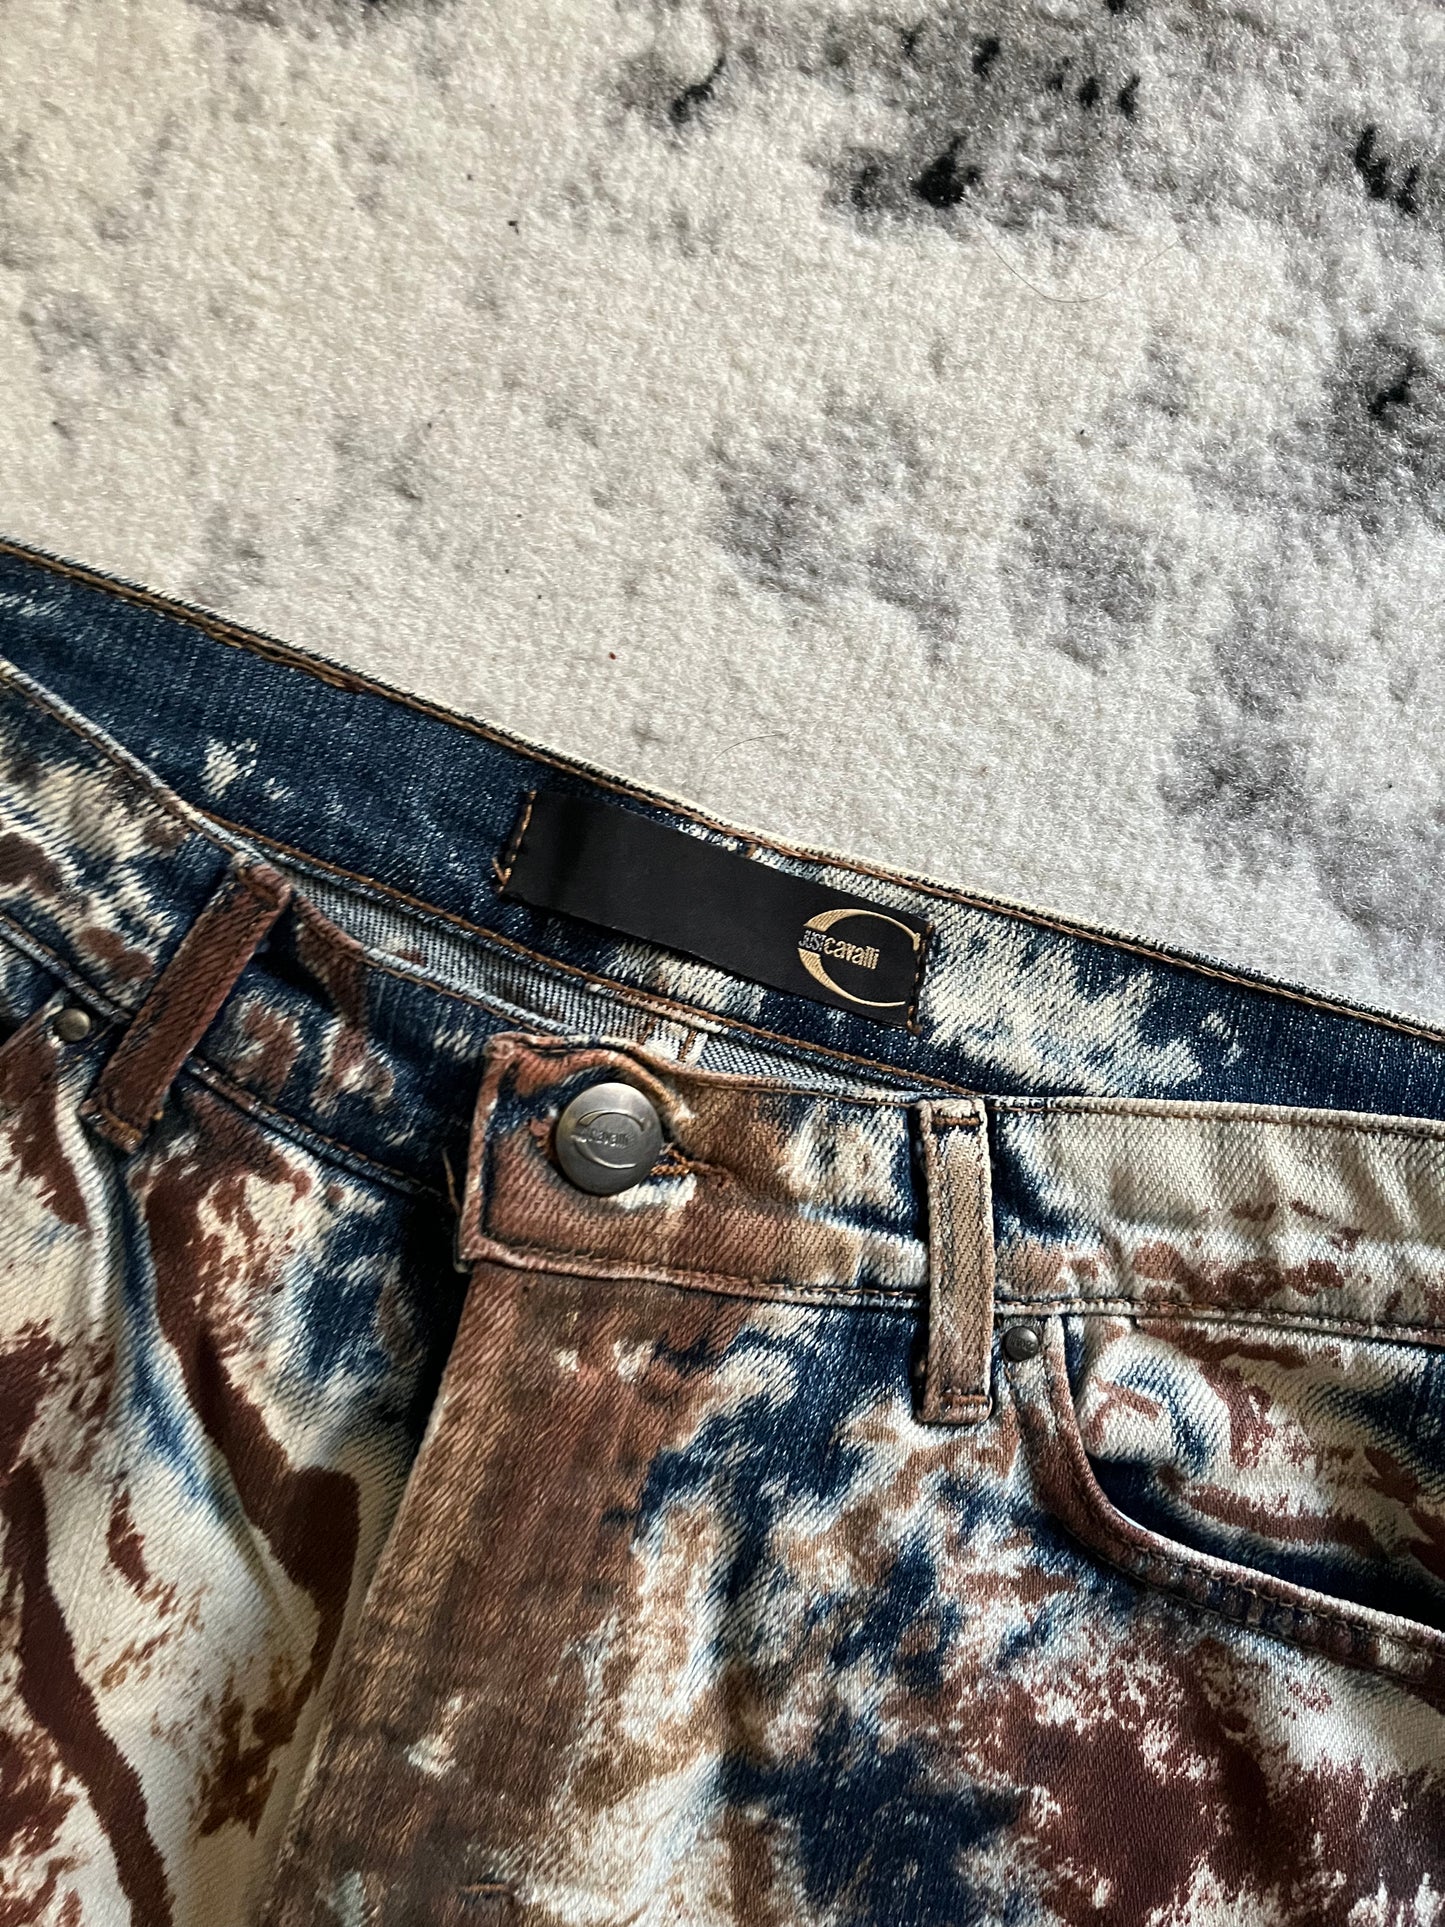 2000 Just Cavalli World Rust Eroded Ultimate Pants (S)